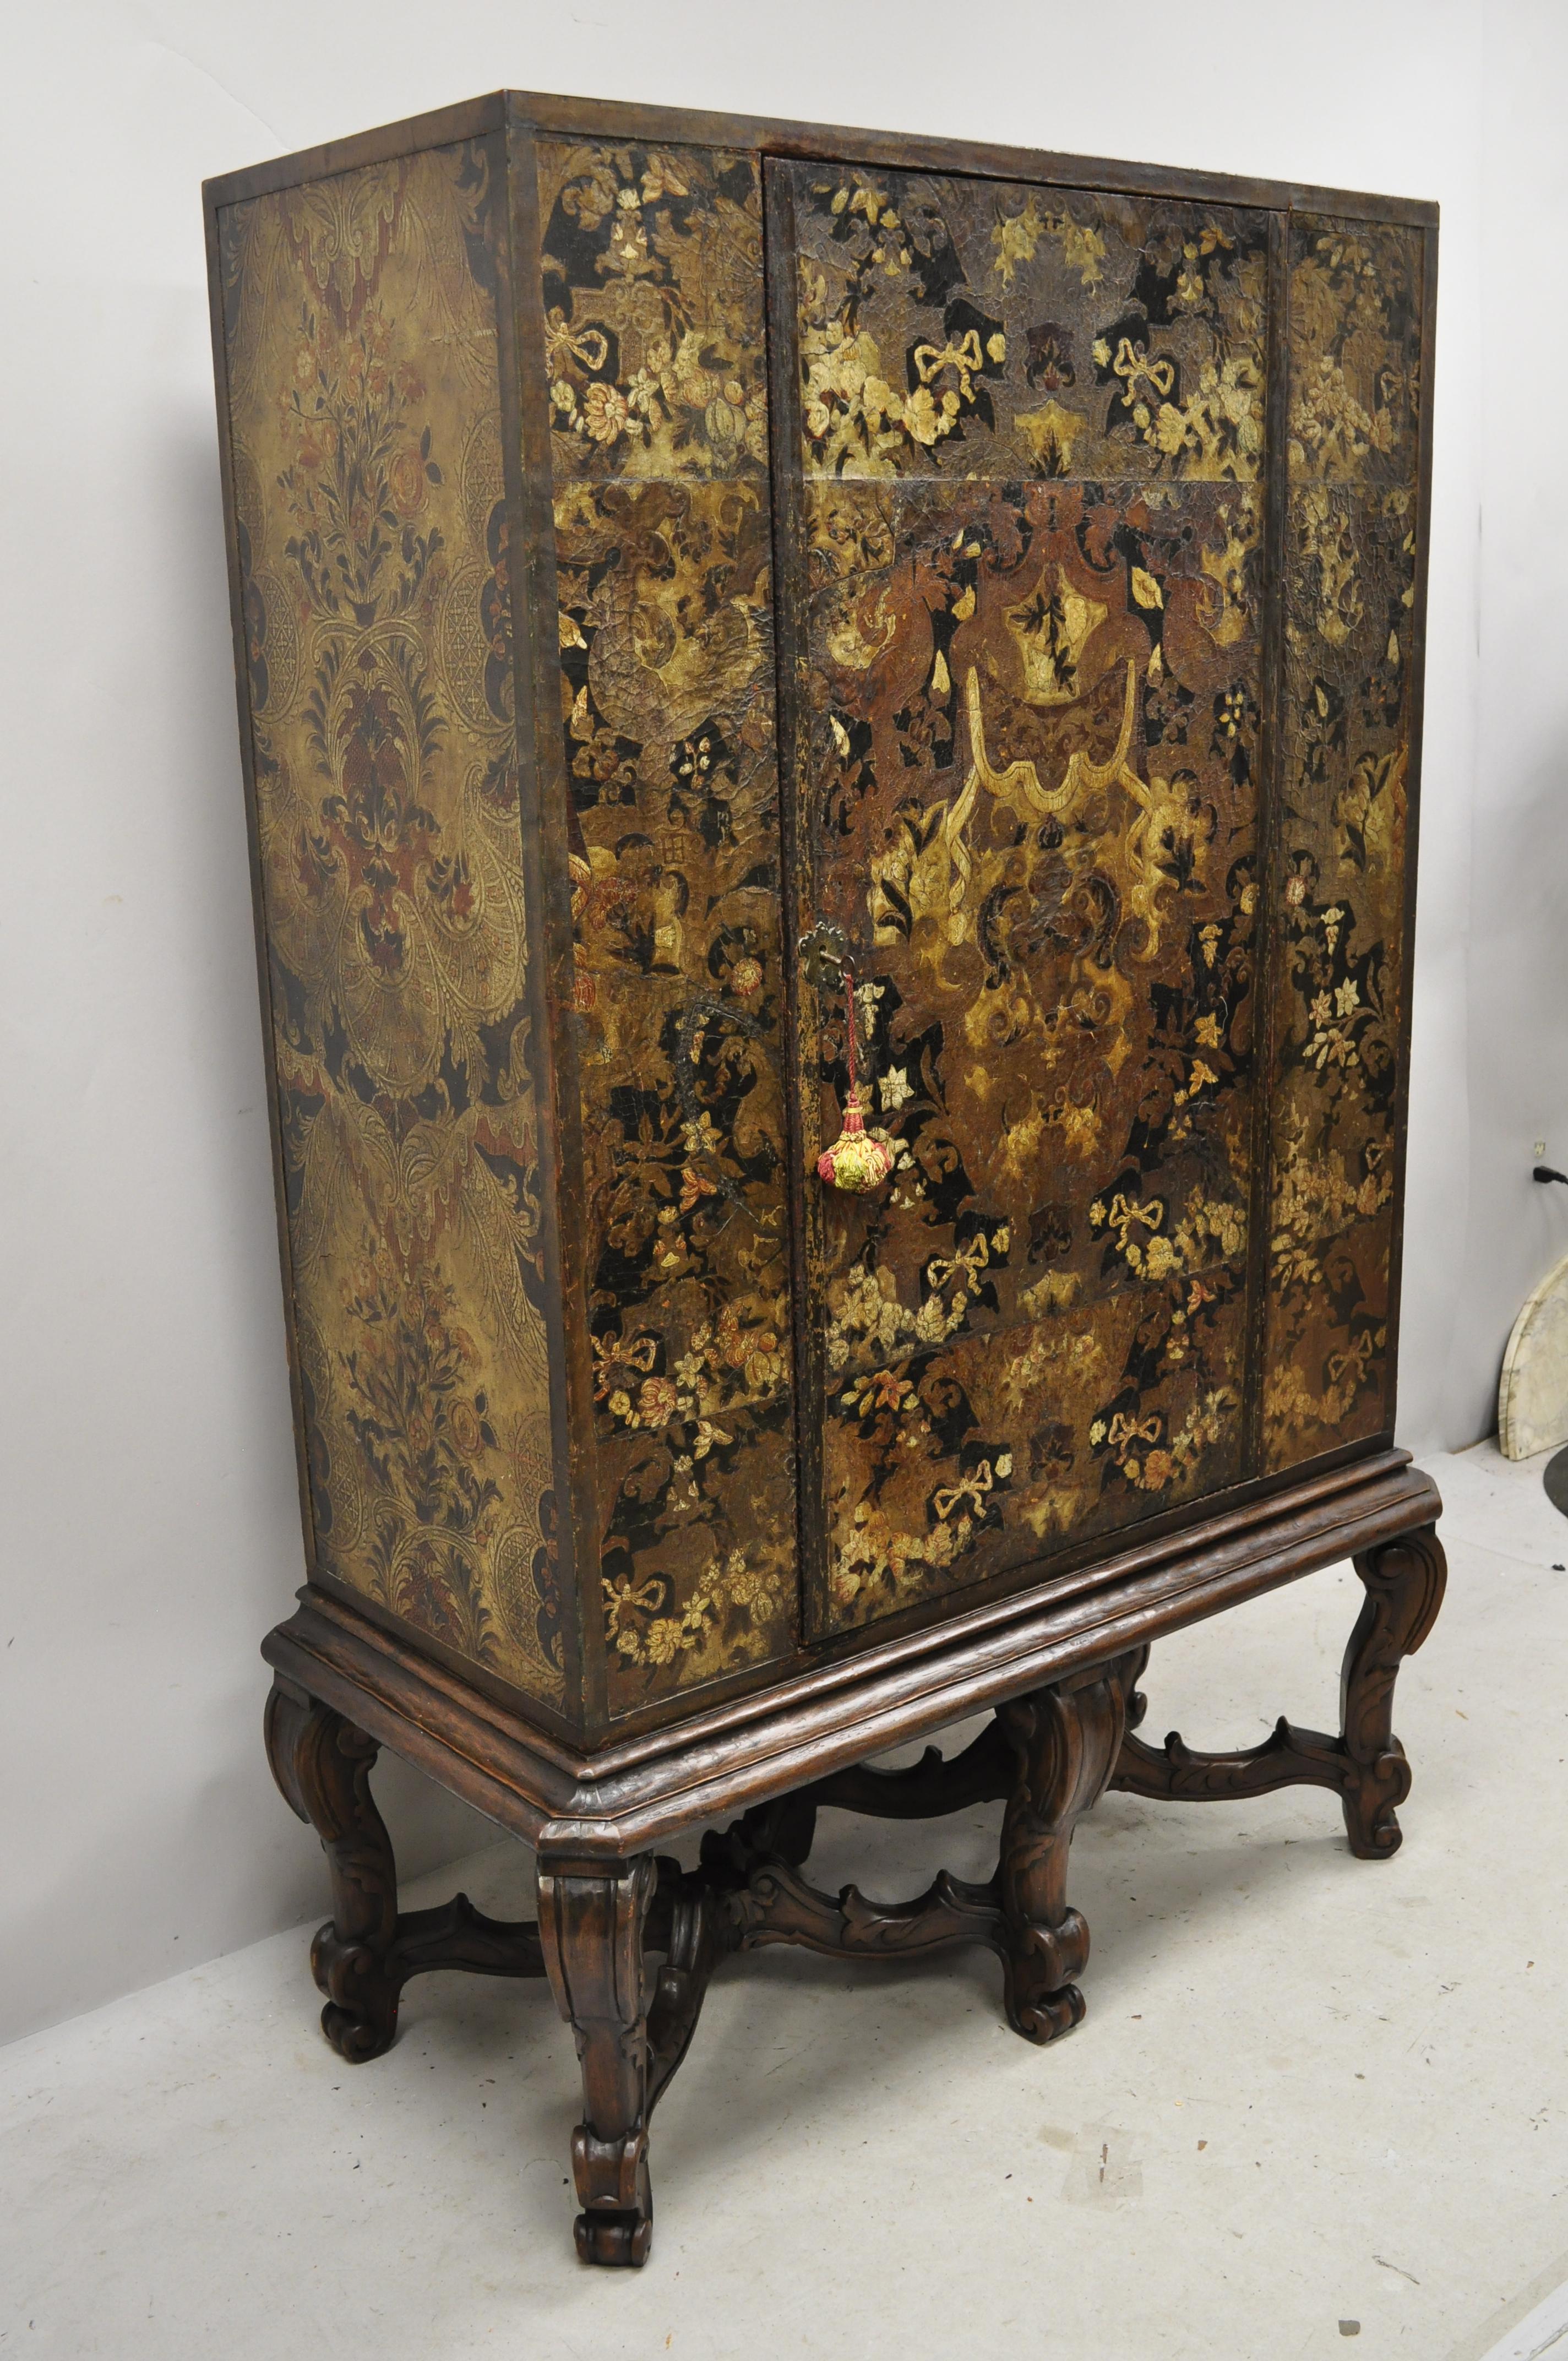 Antique Charles II Georgian Japanned carved lacquer China cabinet on base. Item features ornate lacquer decorated case, solid carved walnut stretcher base, red lacquer interior, leather trim, 1 swing door, working lock and key, 3 wooden shelves (1